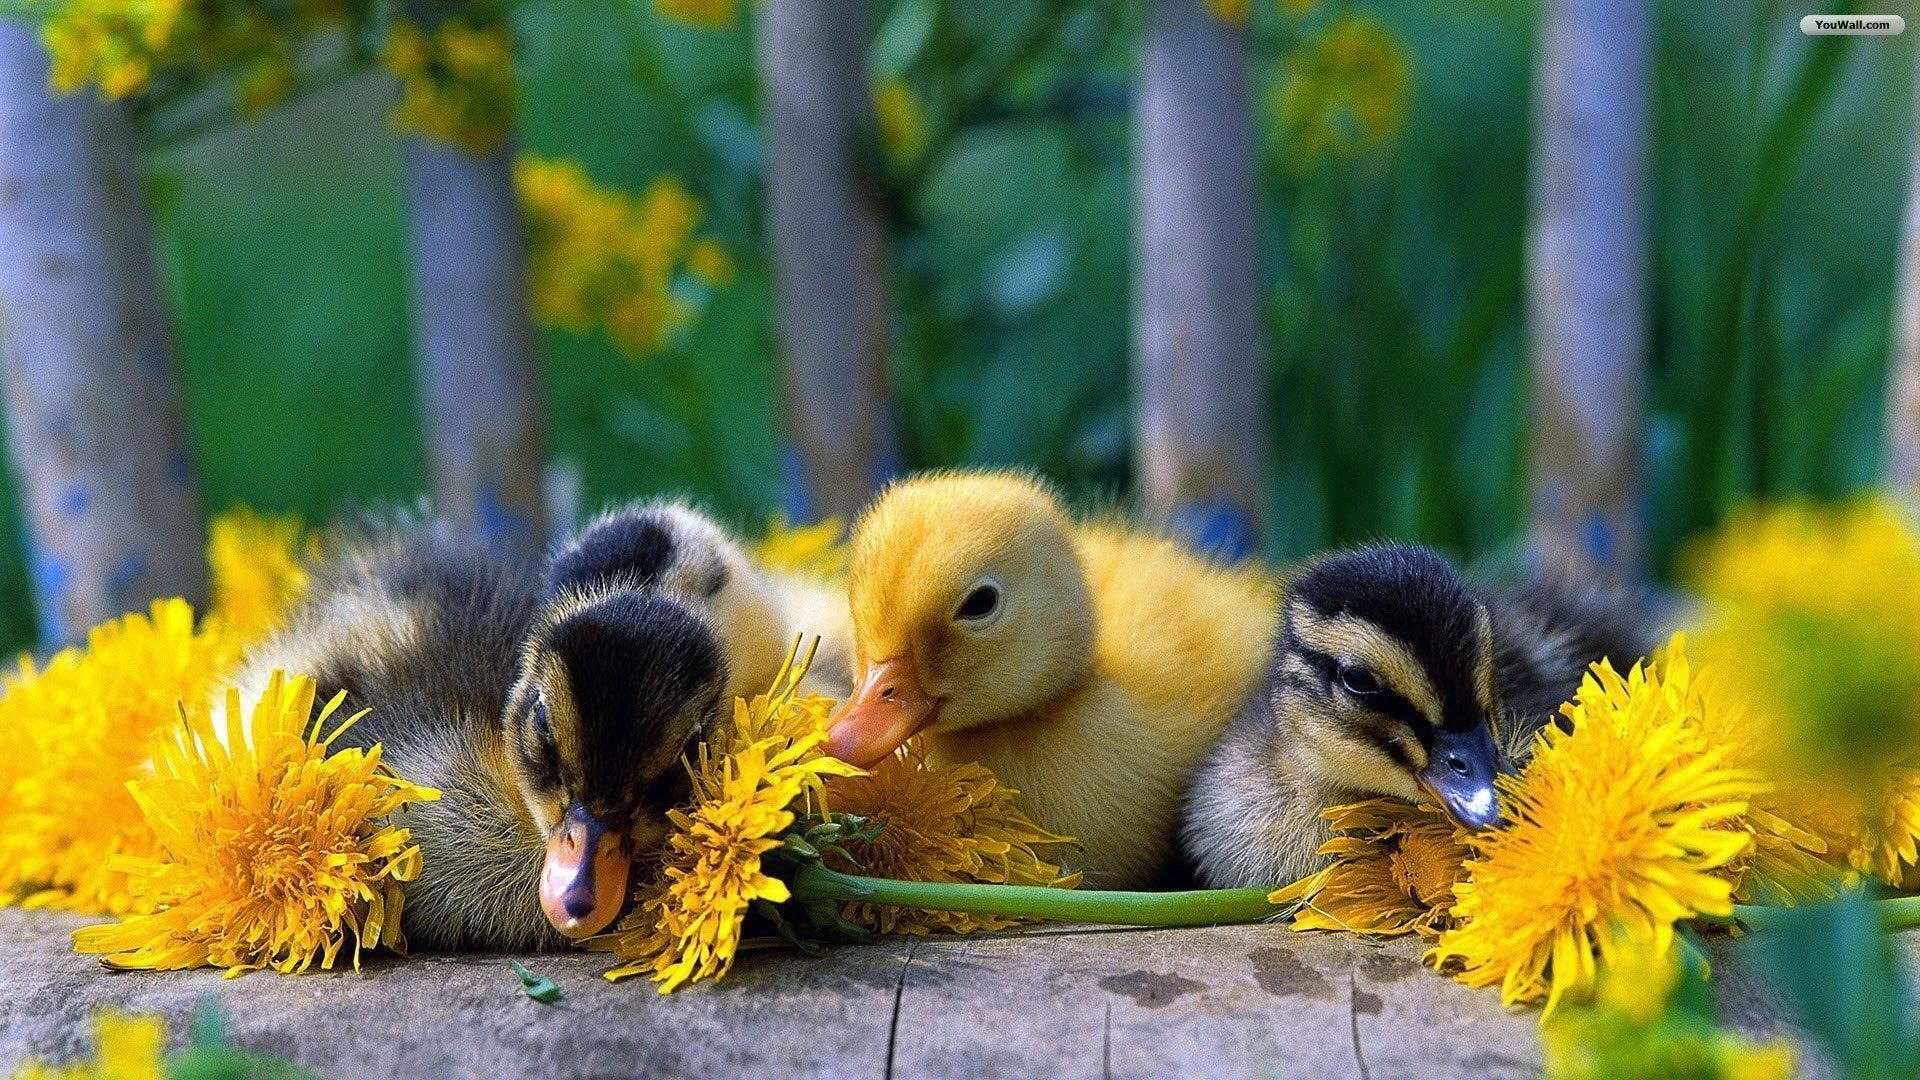 Cute Baby Duck With Flowers Wallpaper, Get It Now!!